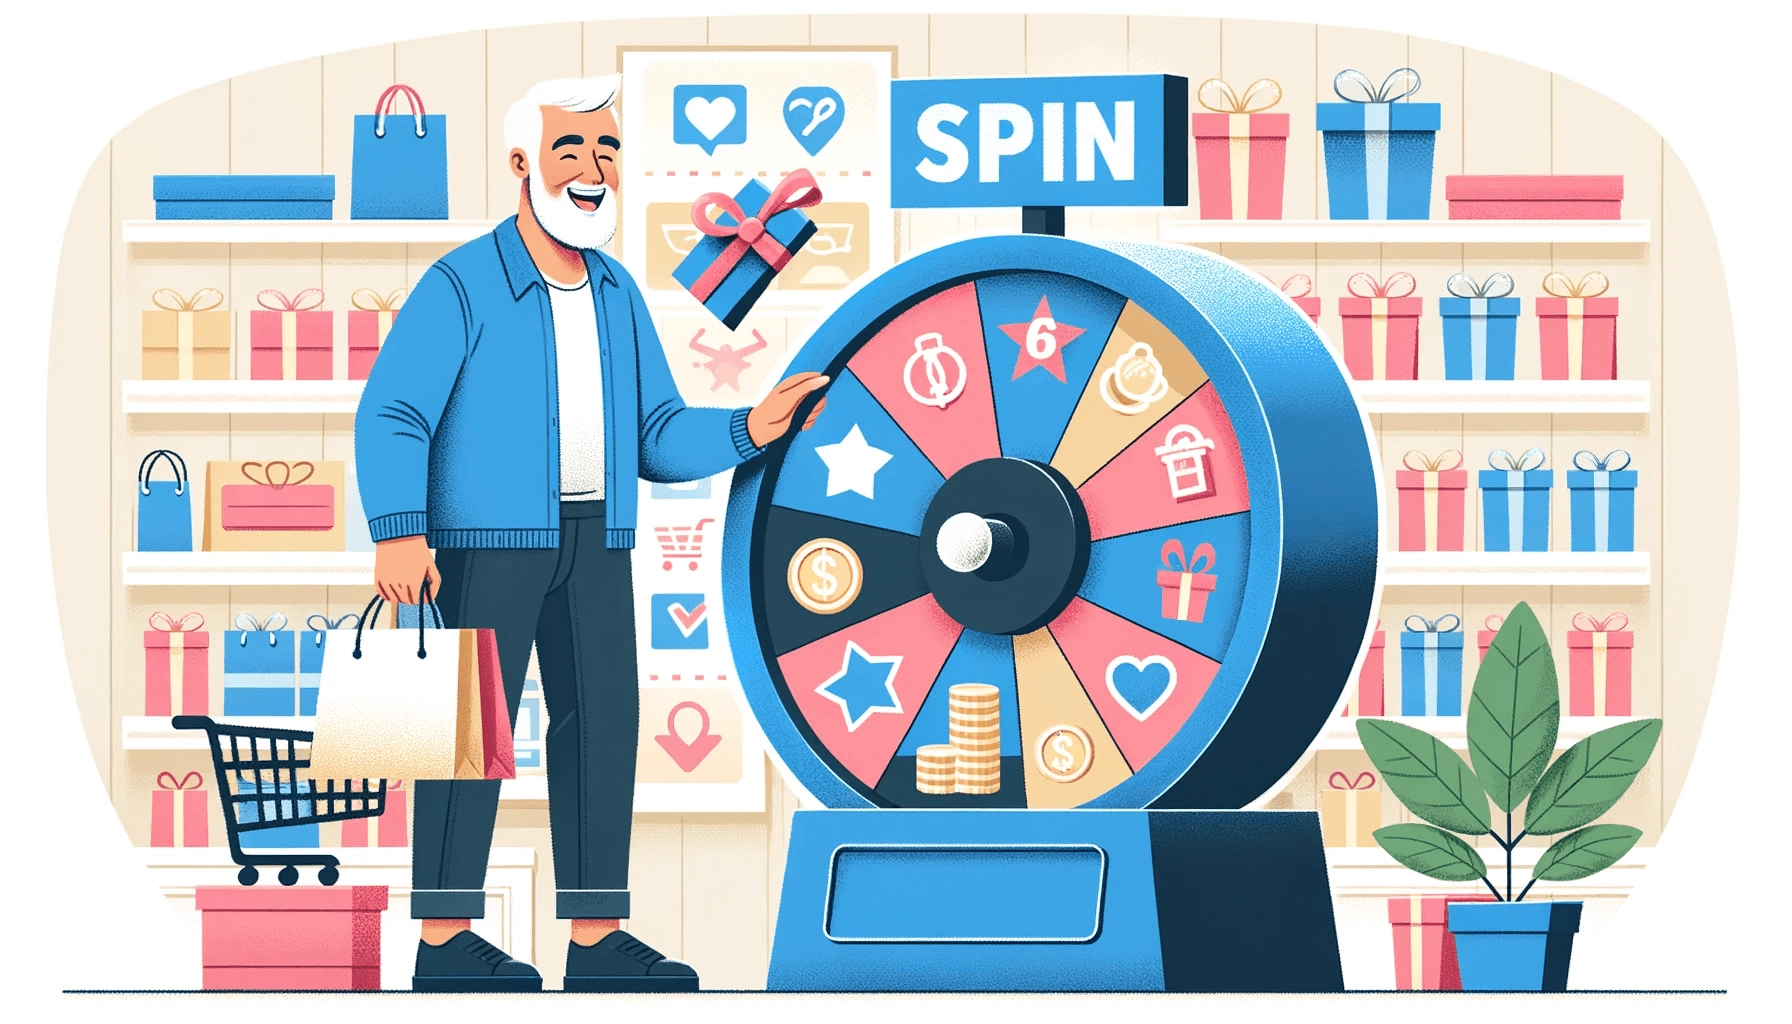 Illustration of a consumer playing a spin-the-wheel game in a retail store